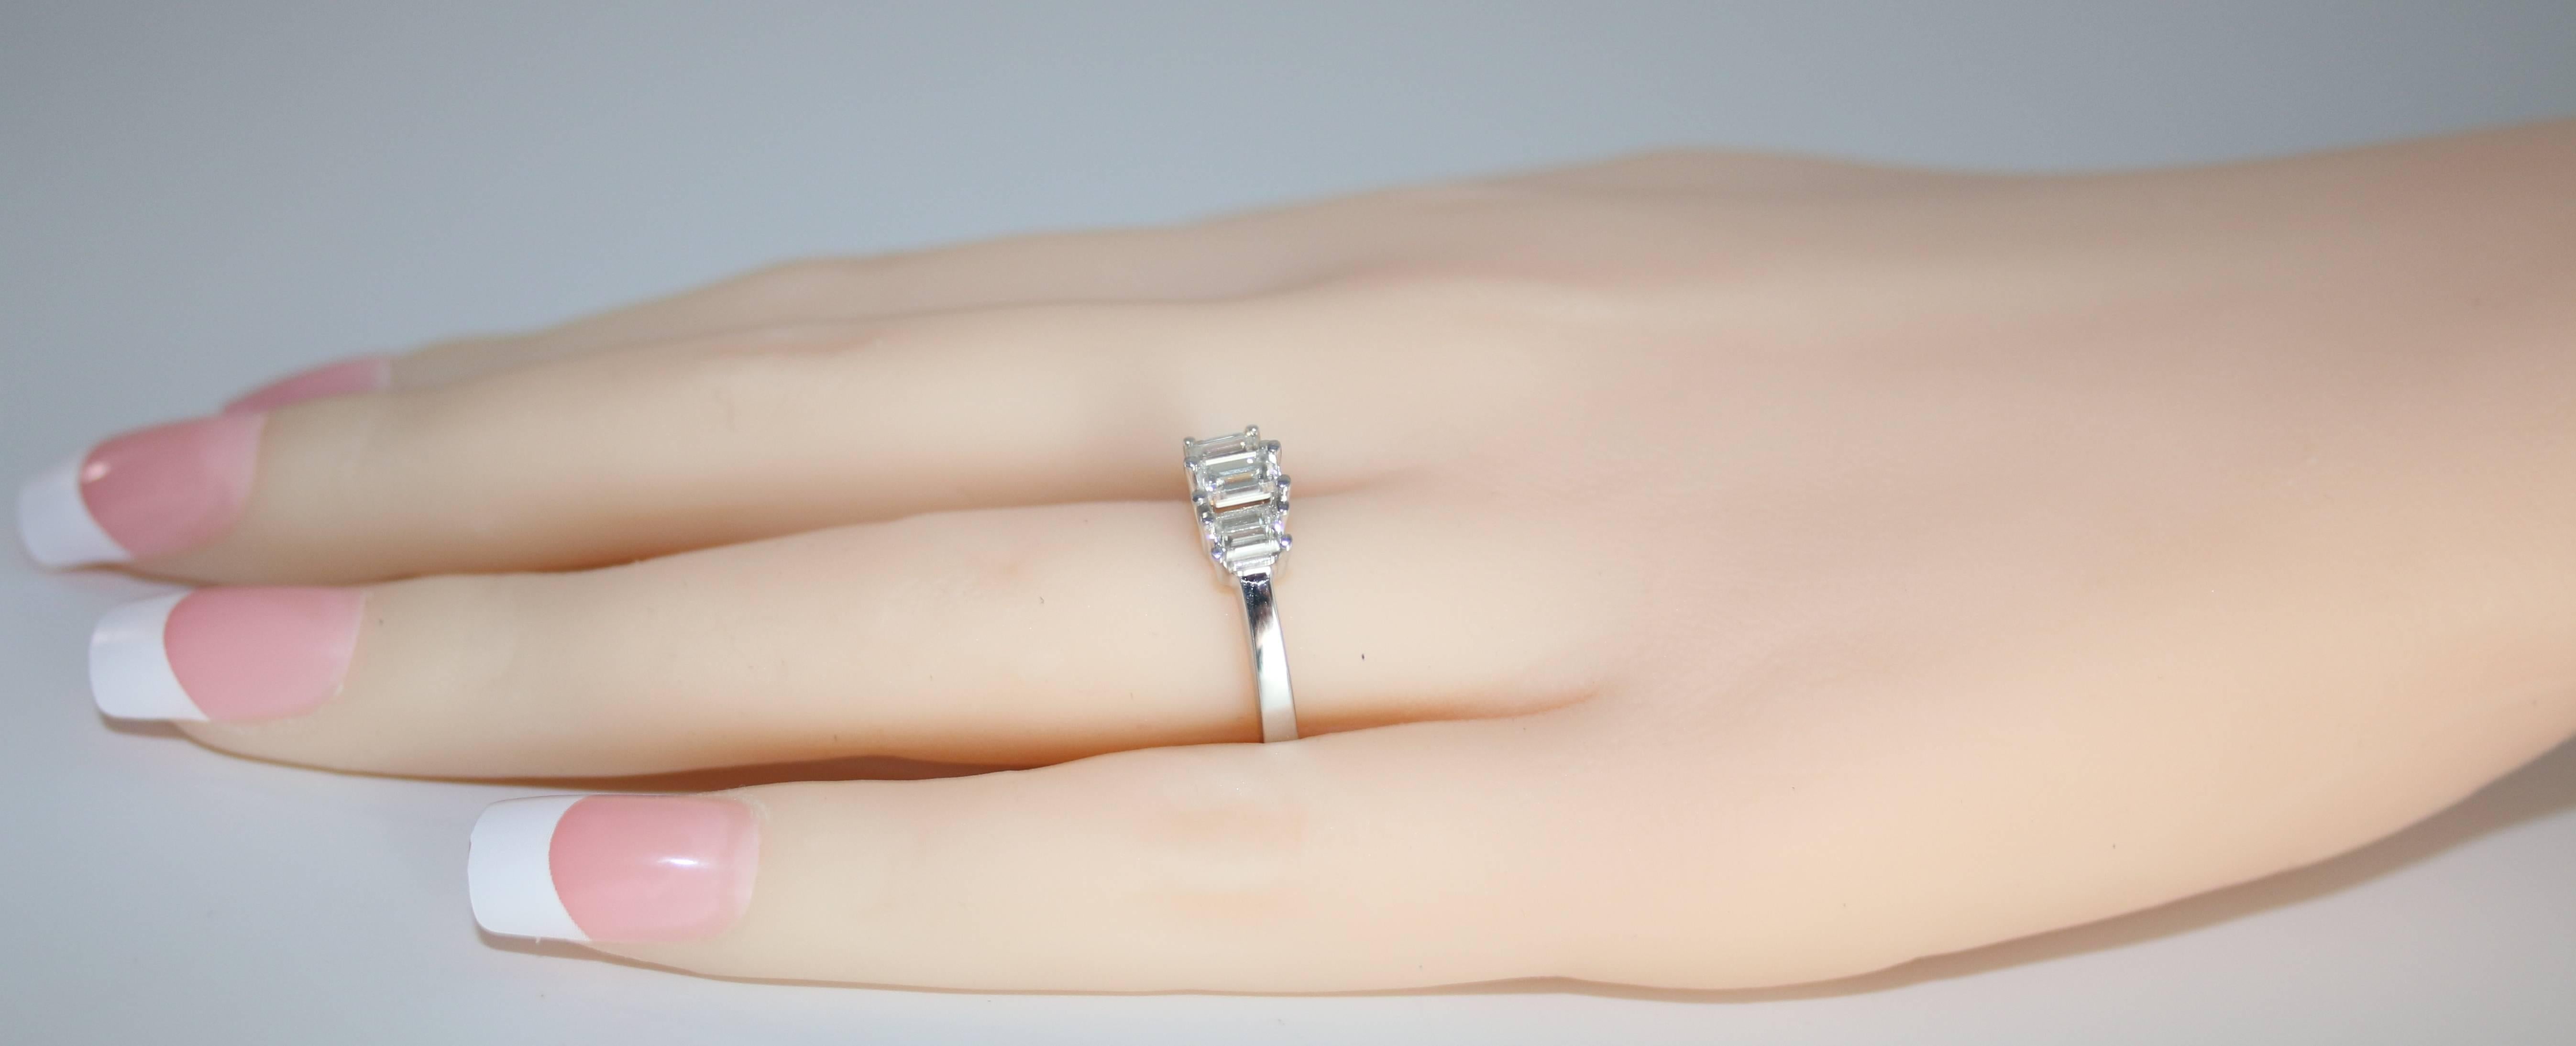 emerald cut diamond ring with emerald side stones